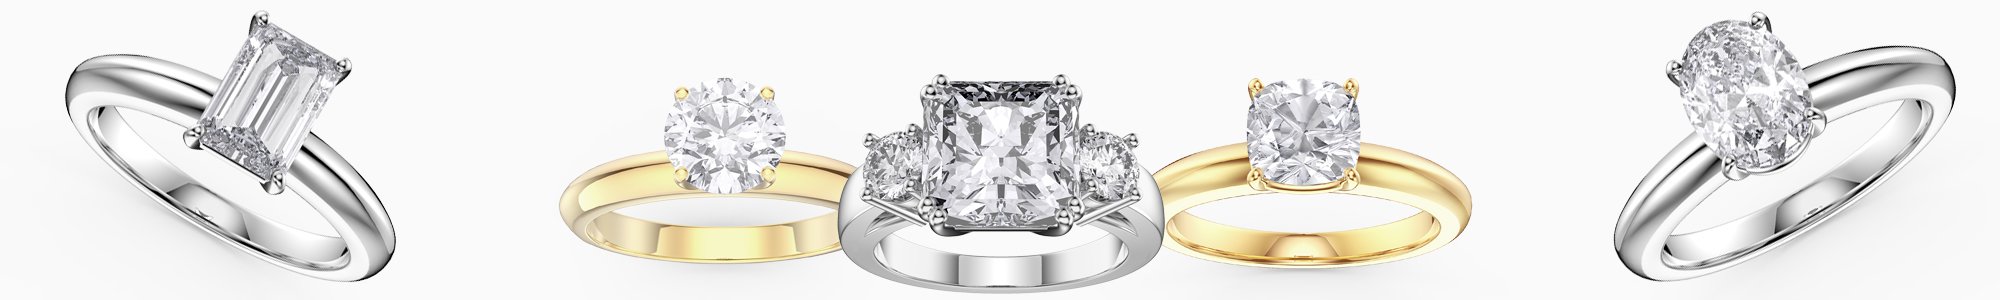 Shop Diamond Solitaire Rings by Jian London. Buy direct and save from our wide selection of Solitaire Rings at the Jian London jewellery Store. Free UK Delivery